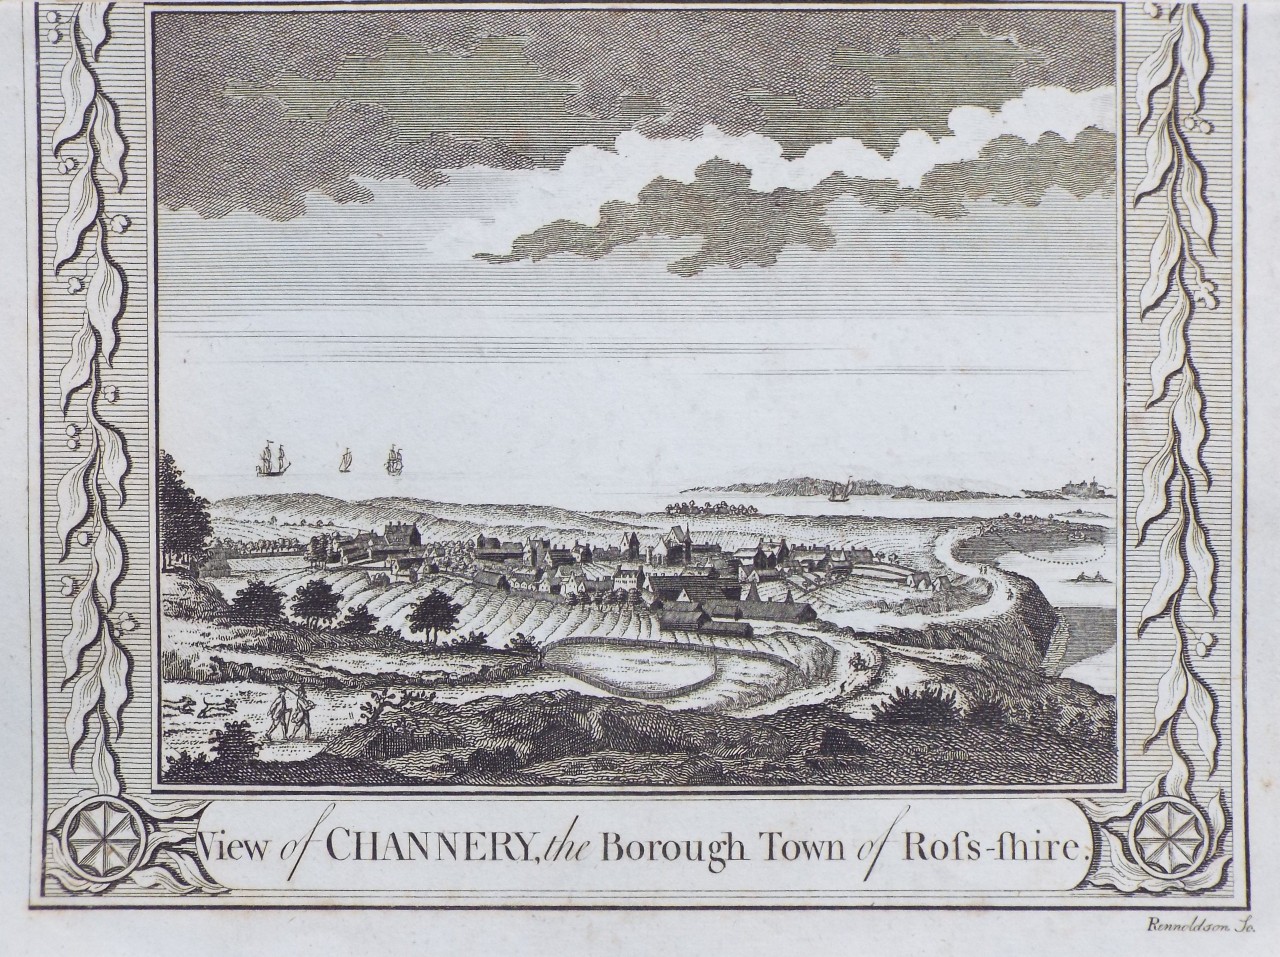 Print - View of Channery, the Borough Town of Ross-shire. - 